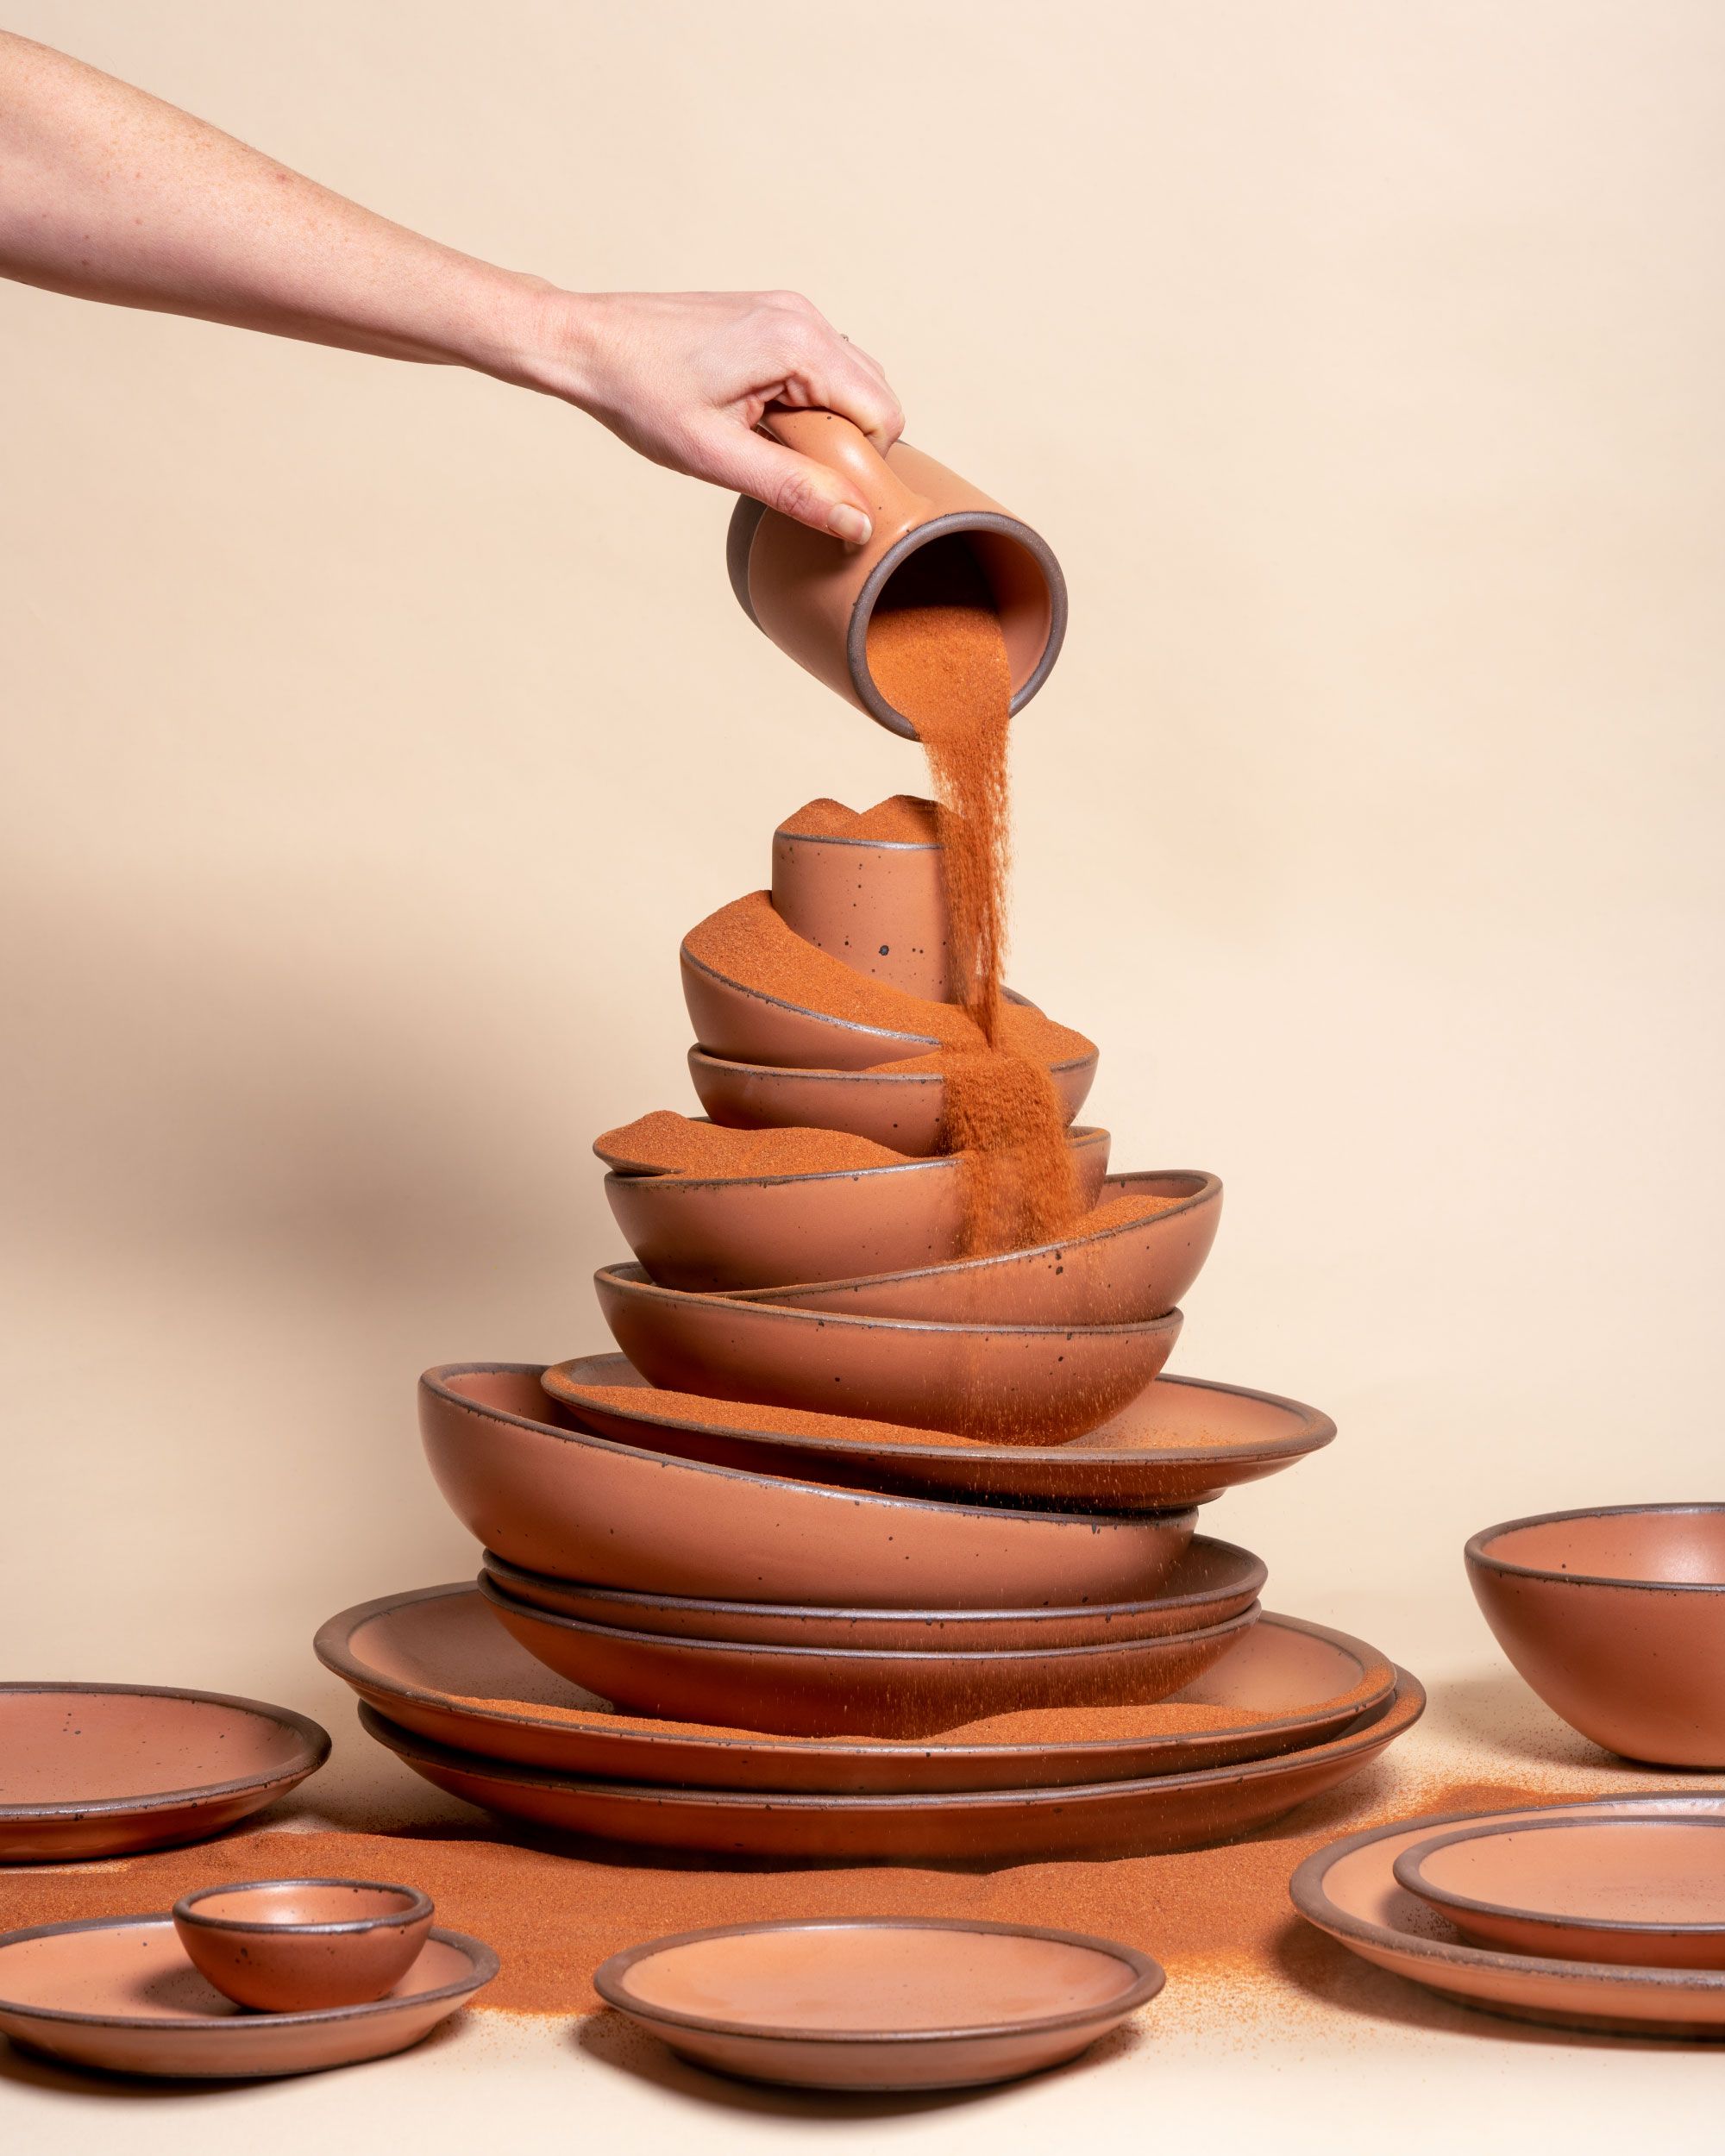 A stack of nude plates and bowls. Overhead, a hand holds a mug and pours a similarly colored desert sand out of a mug on top of the stack of pottery.